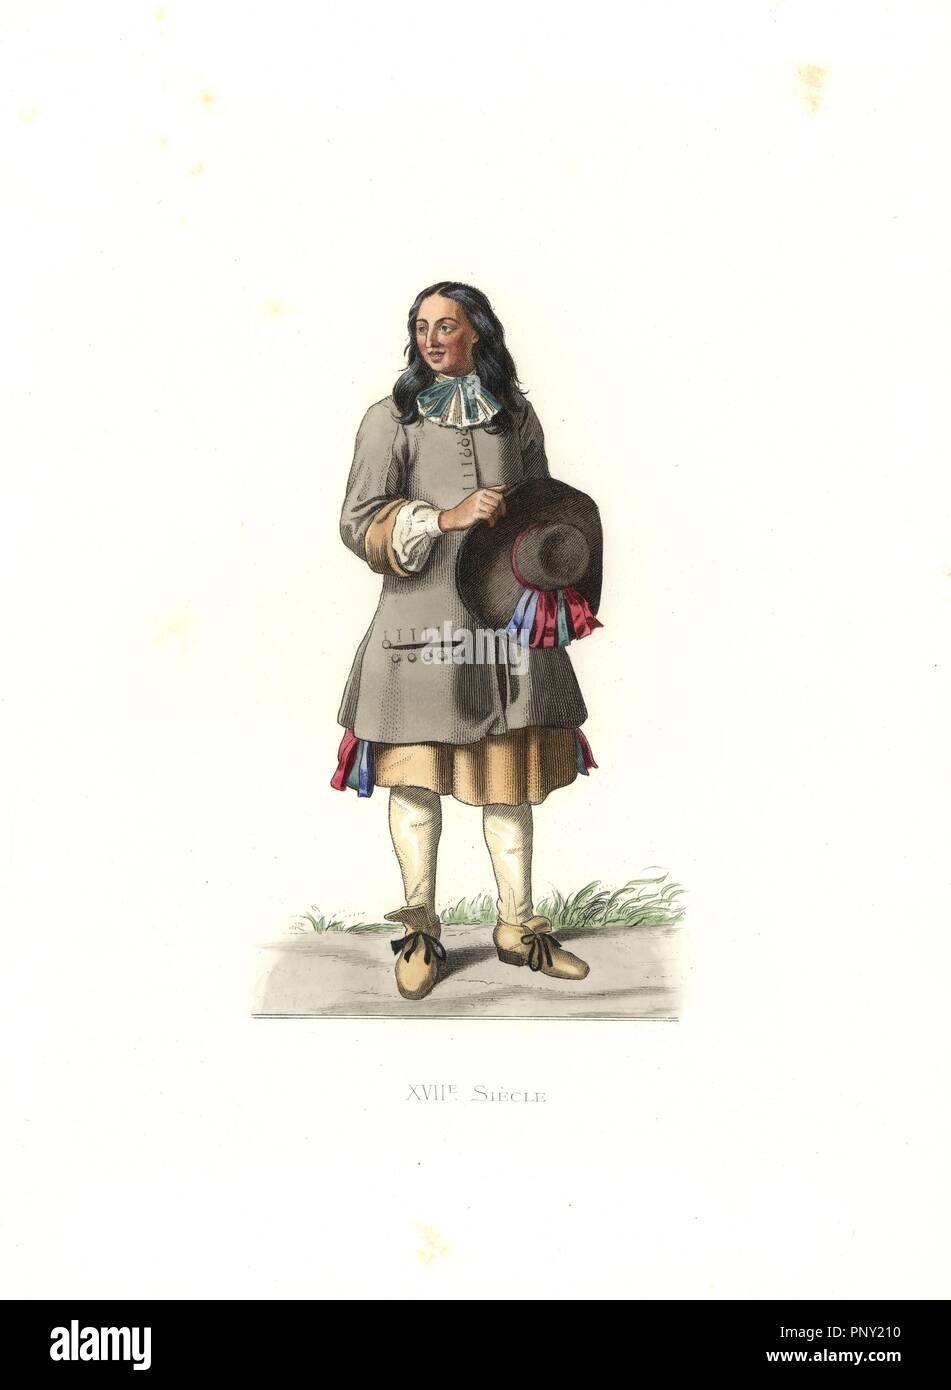 Peasant, France, 17th century, from a 1679 print by Jean de Saint-Jean. Handcolored illustration by E. Lechevallier-Chevignard, lithographed by A. Didier, L. Flameng, F. Laguillermie, from Georges Duplessis's 'Costumes historiques des XVIe, XVIIe et XVIIIe siecles' (Historical costumes of the 16th, 17th and 18th centuries), Paris 1867. The book was a continuation of the series on the costumes of the 12th to 15th centuries published by Camille Bonnard and Paul Mercuri from 1830. Georges Duplessis (1834-1899) was curator of the Prints department at the Bibliotheque nationale. Edmond Lechevallier Stock Photo